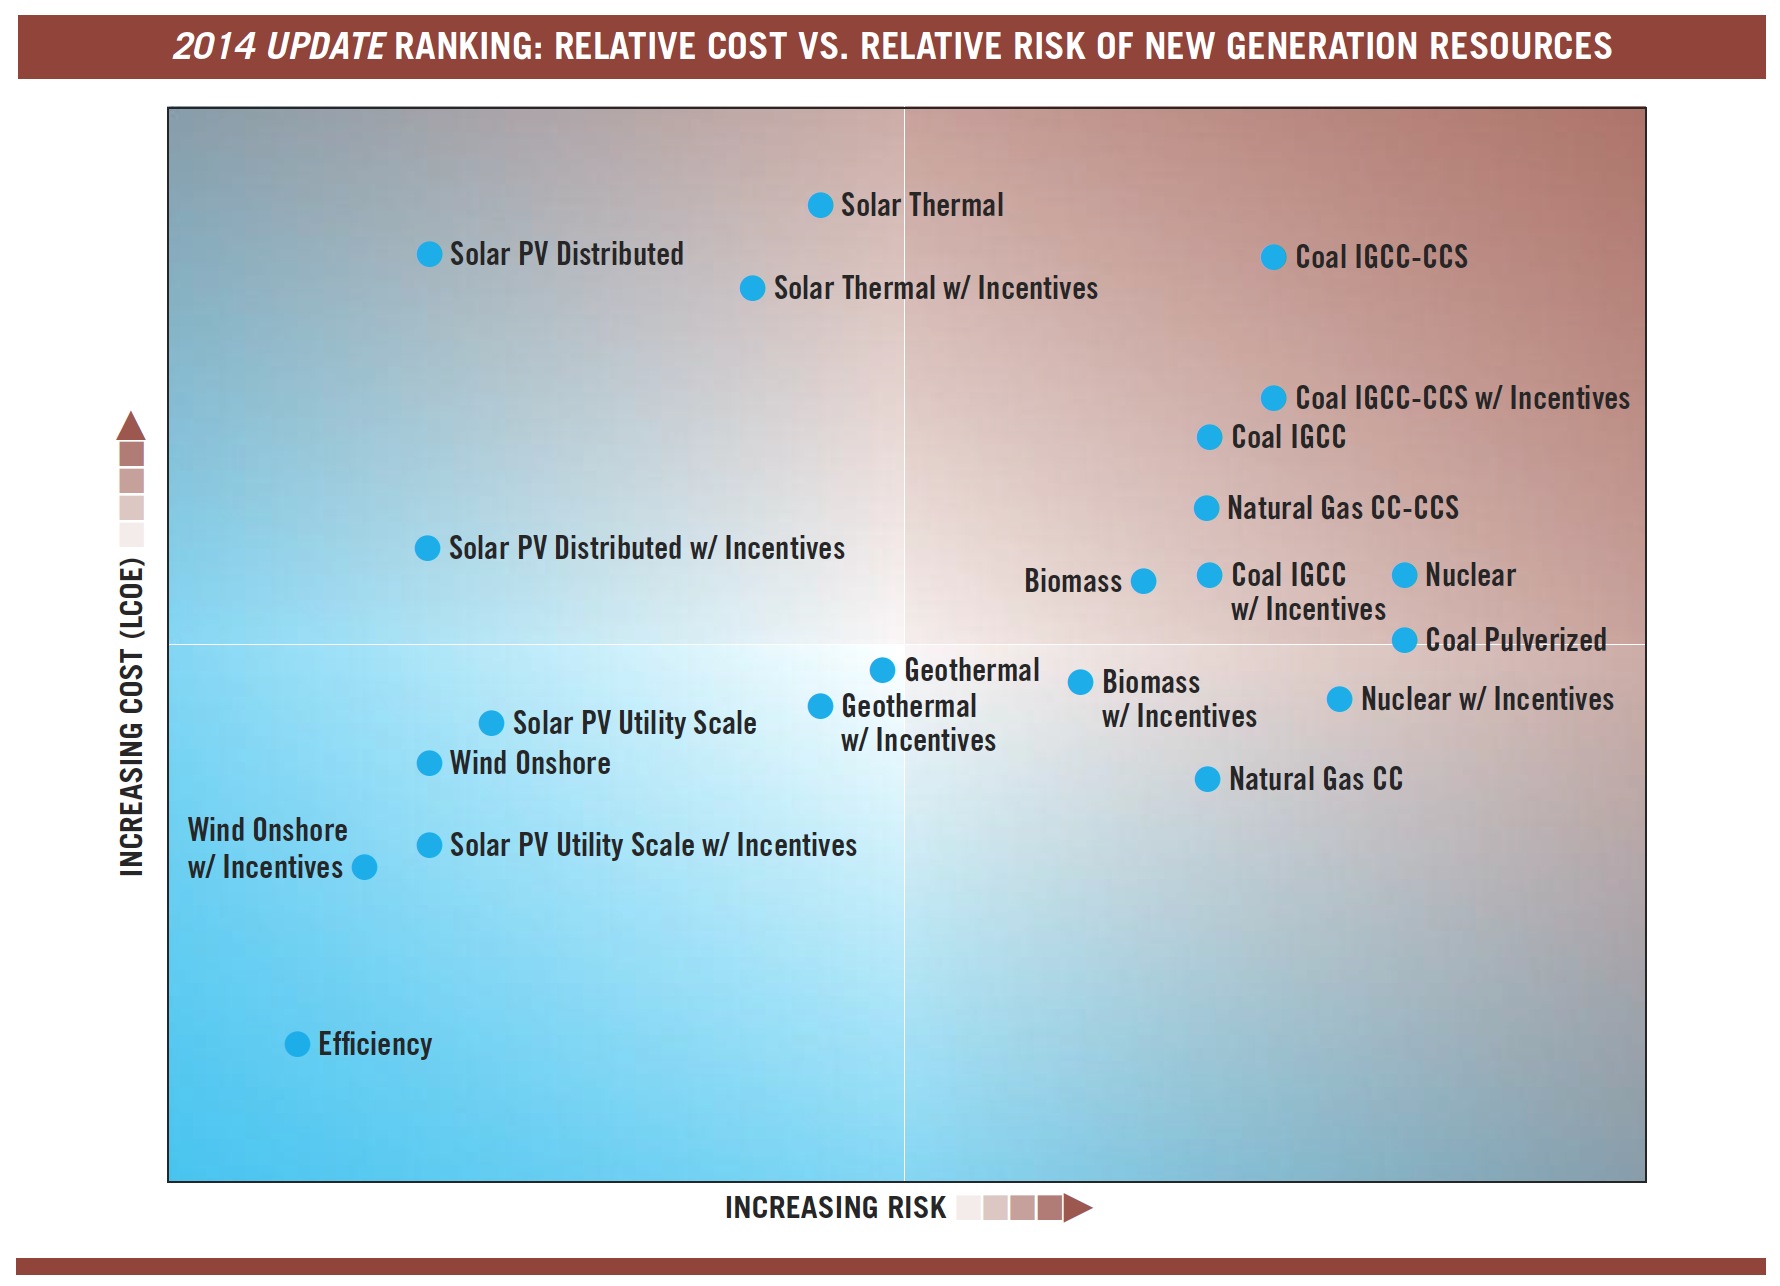 2014 UPDATE RANKING: RELATIVE COST VS. RELATIVE RISK OF NEW GENERATION RESOURCES